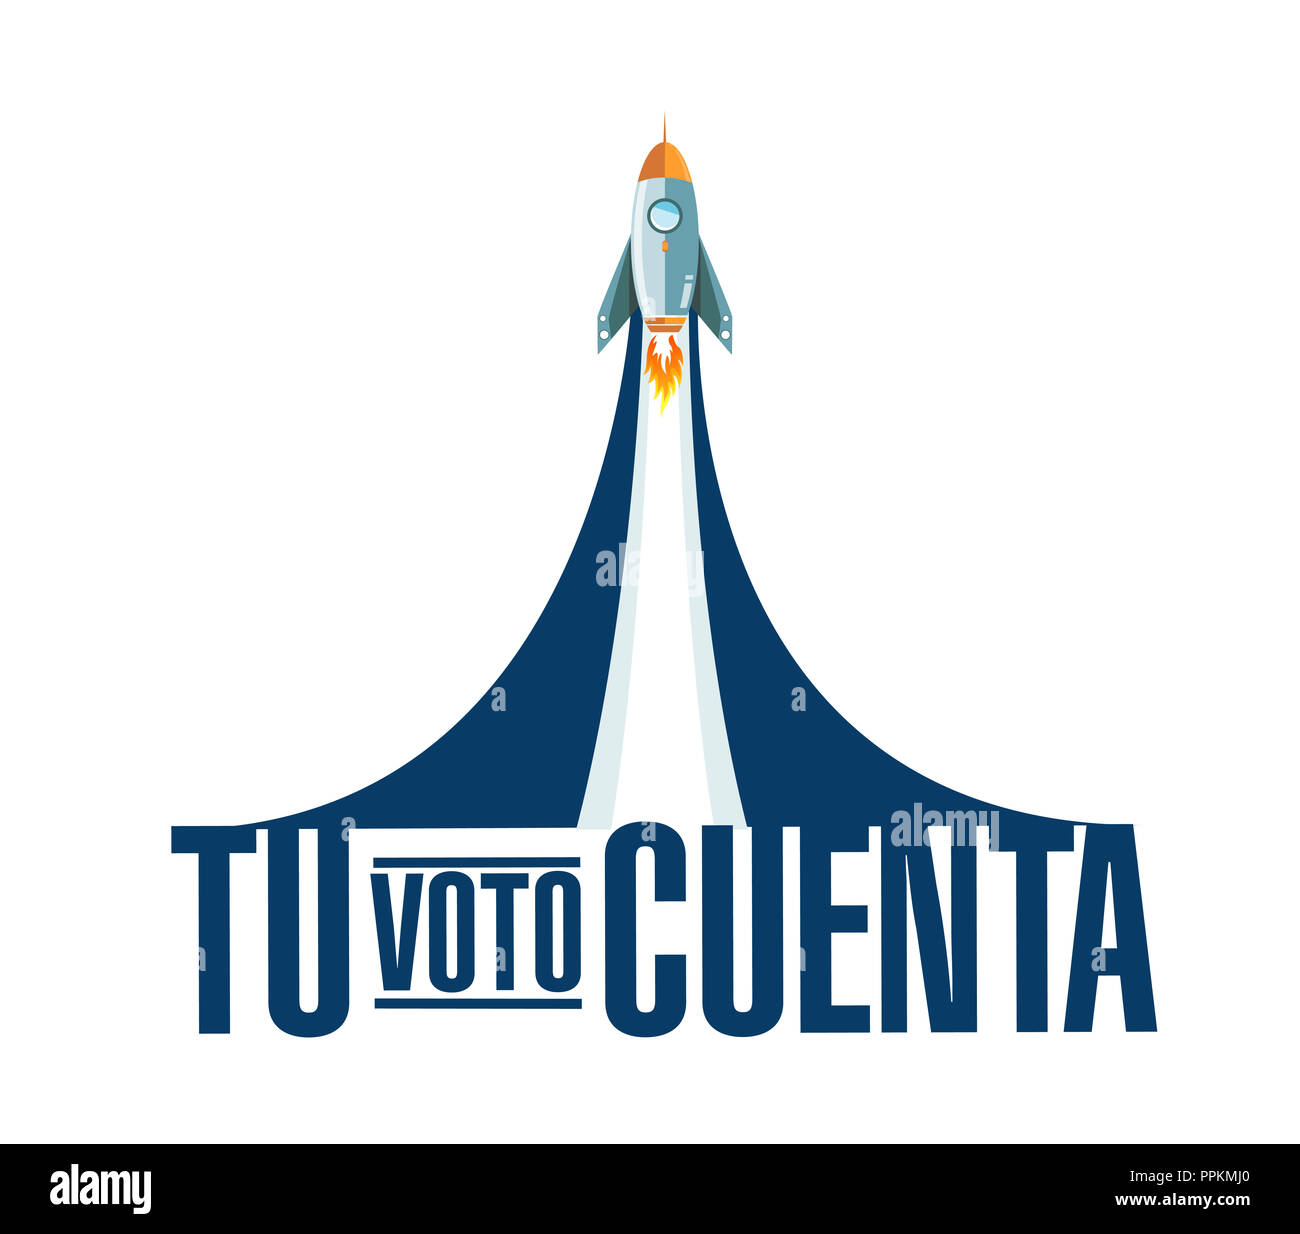 your vote counts in Spanish rocket smoke message illustration isolated over a white background Stock Photo